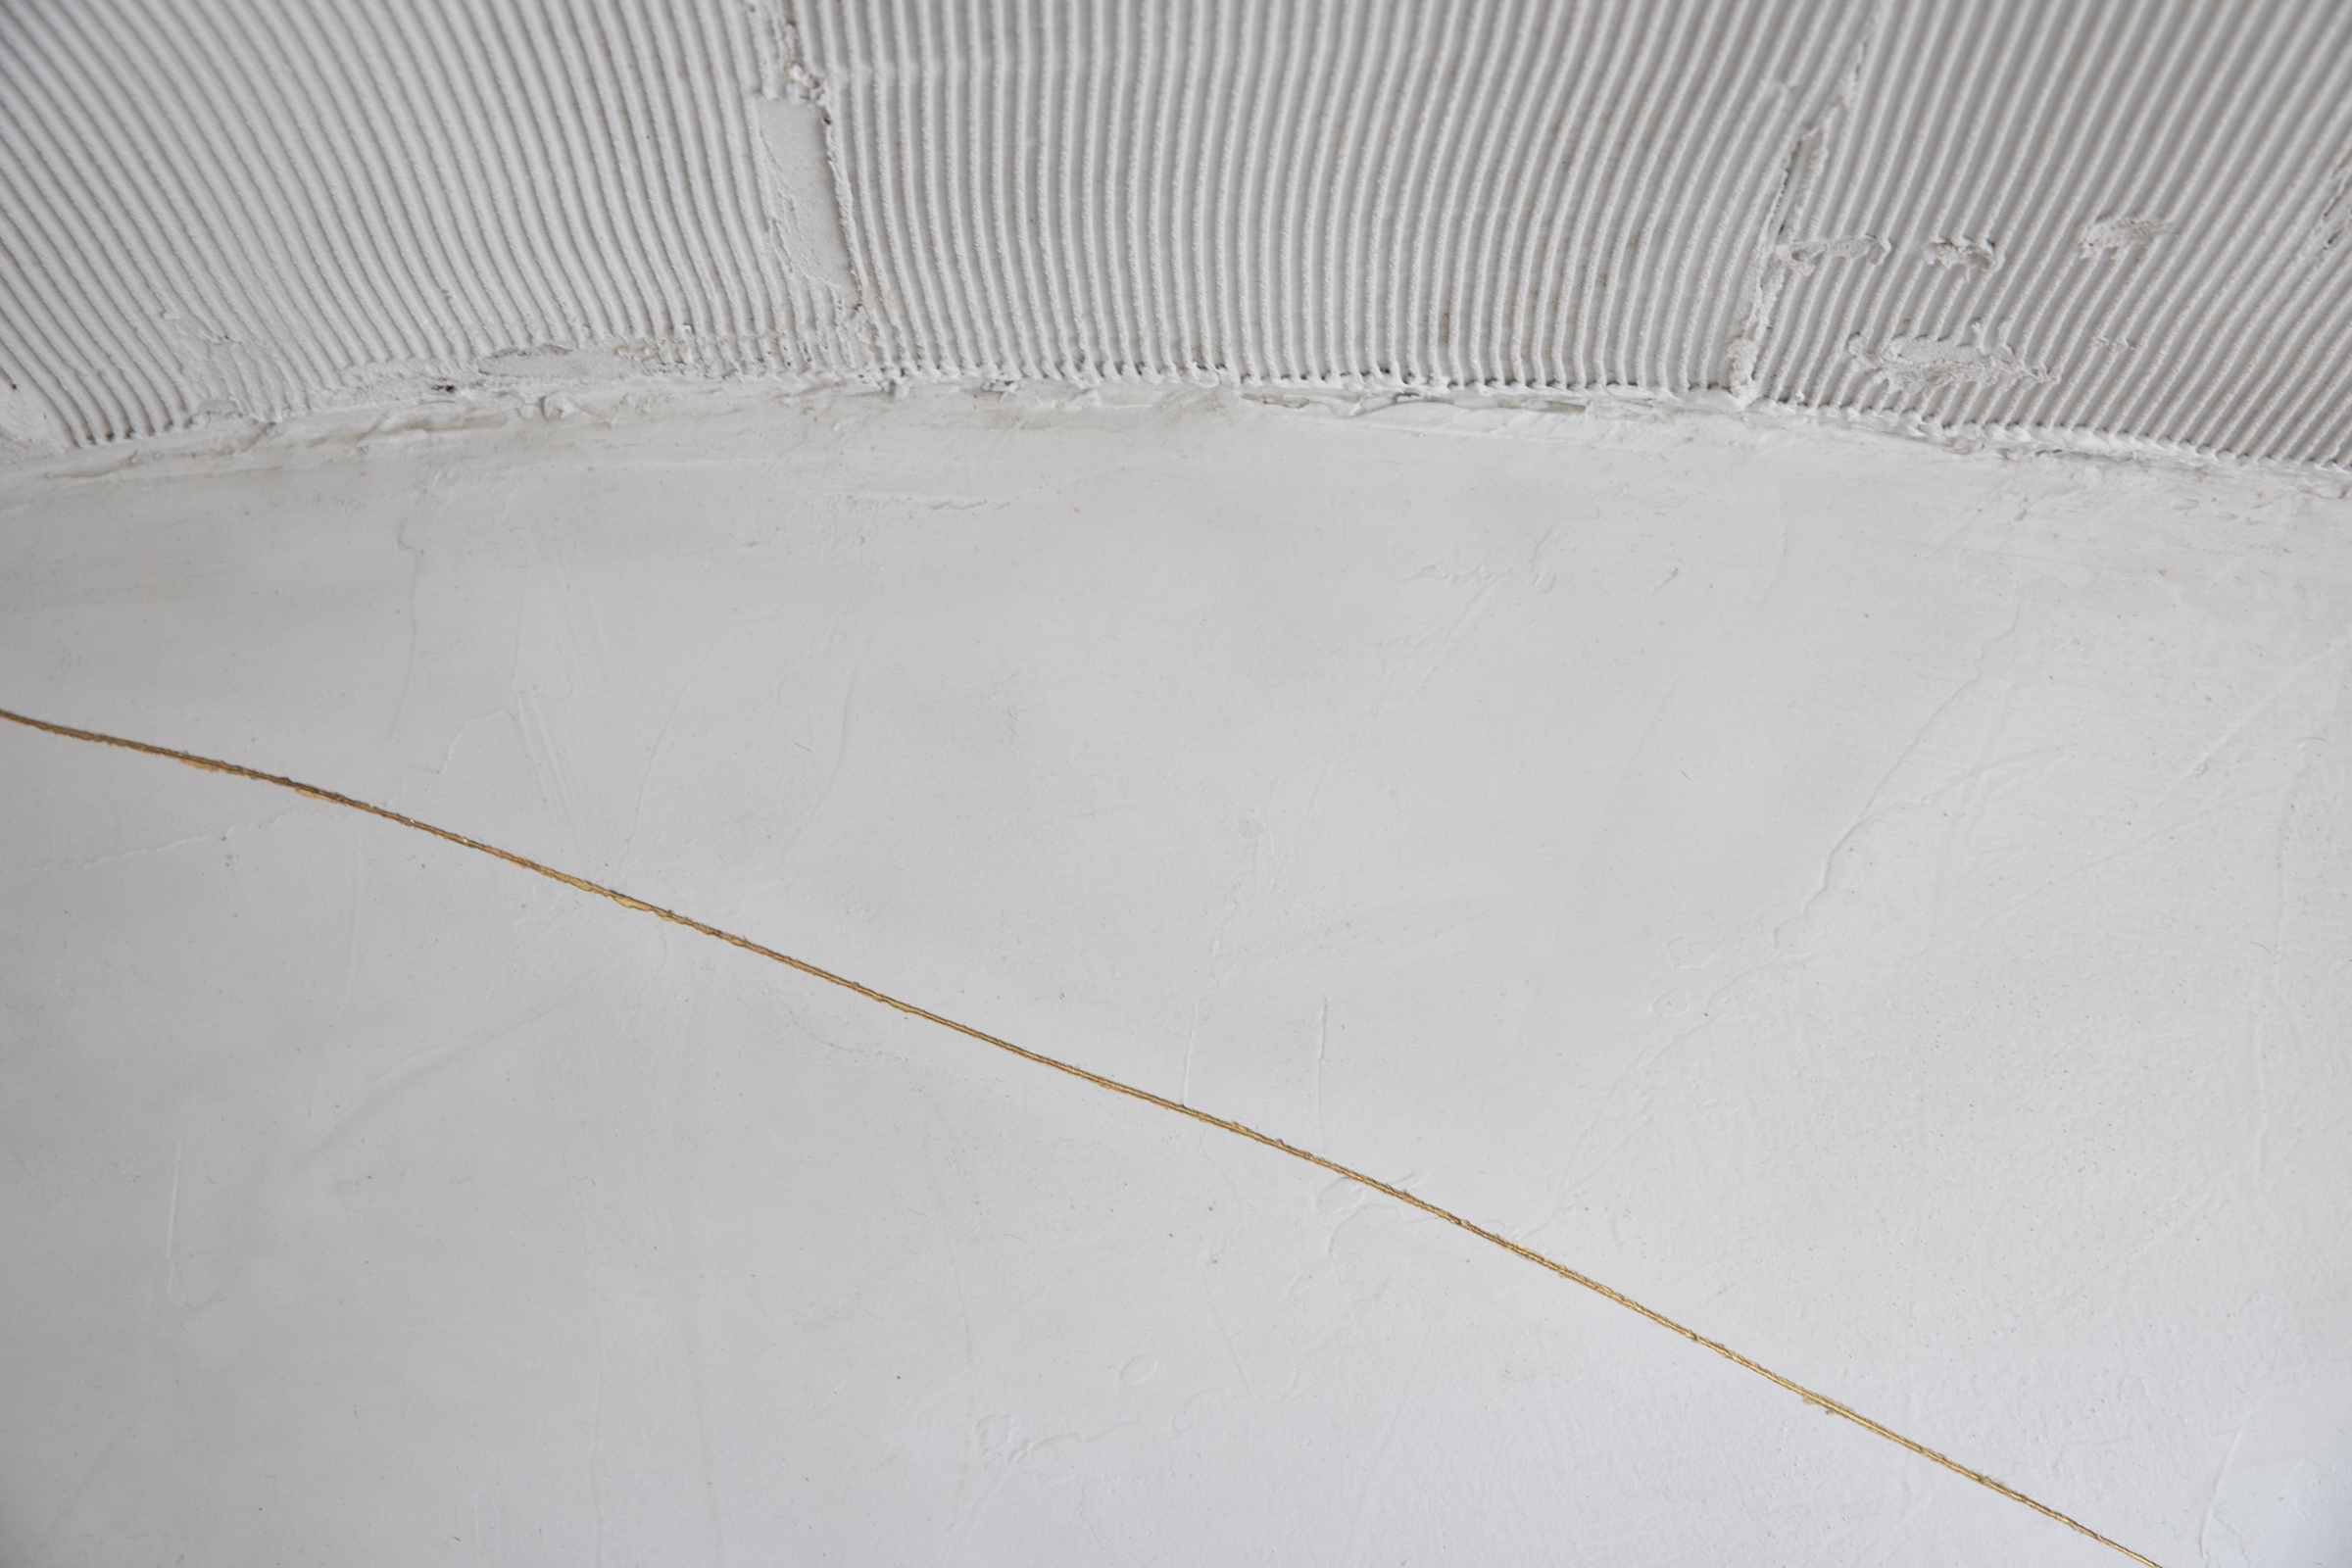 Details of cracks in the floor that emerged from the construction process of the Selo Store